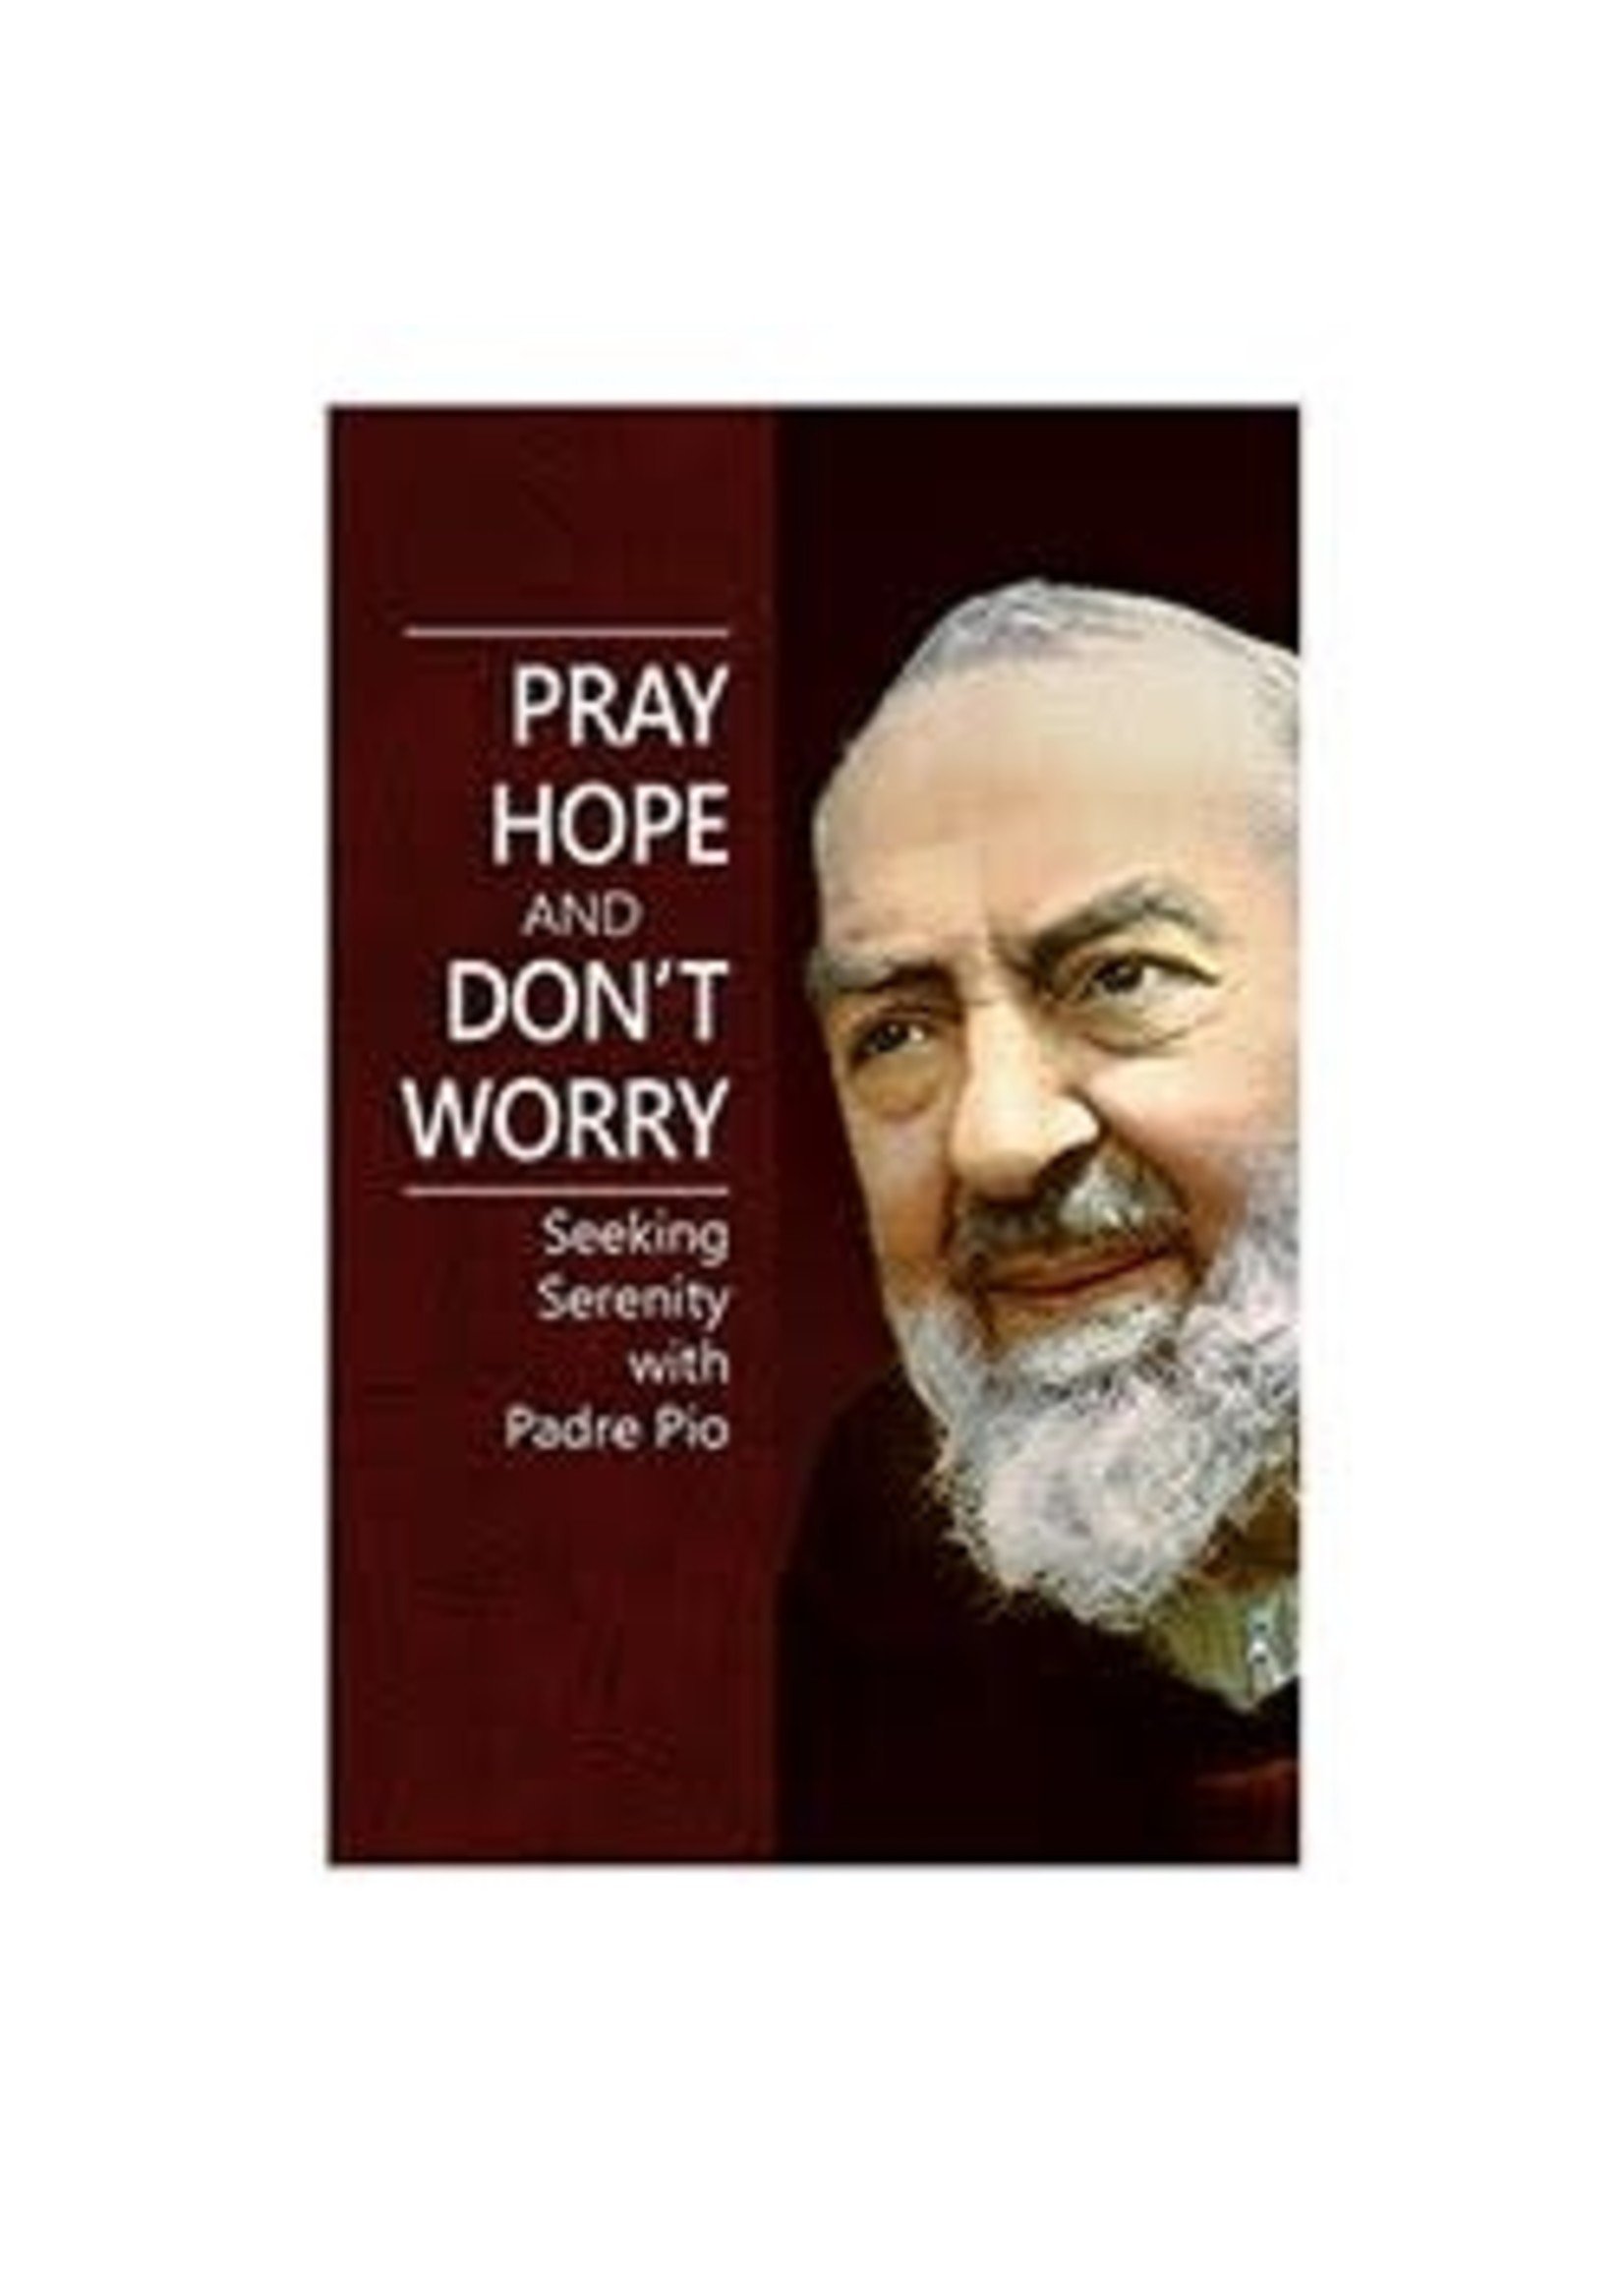 PRAY HOPE AND DON'T WORRY  - PADRE PIO